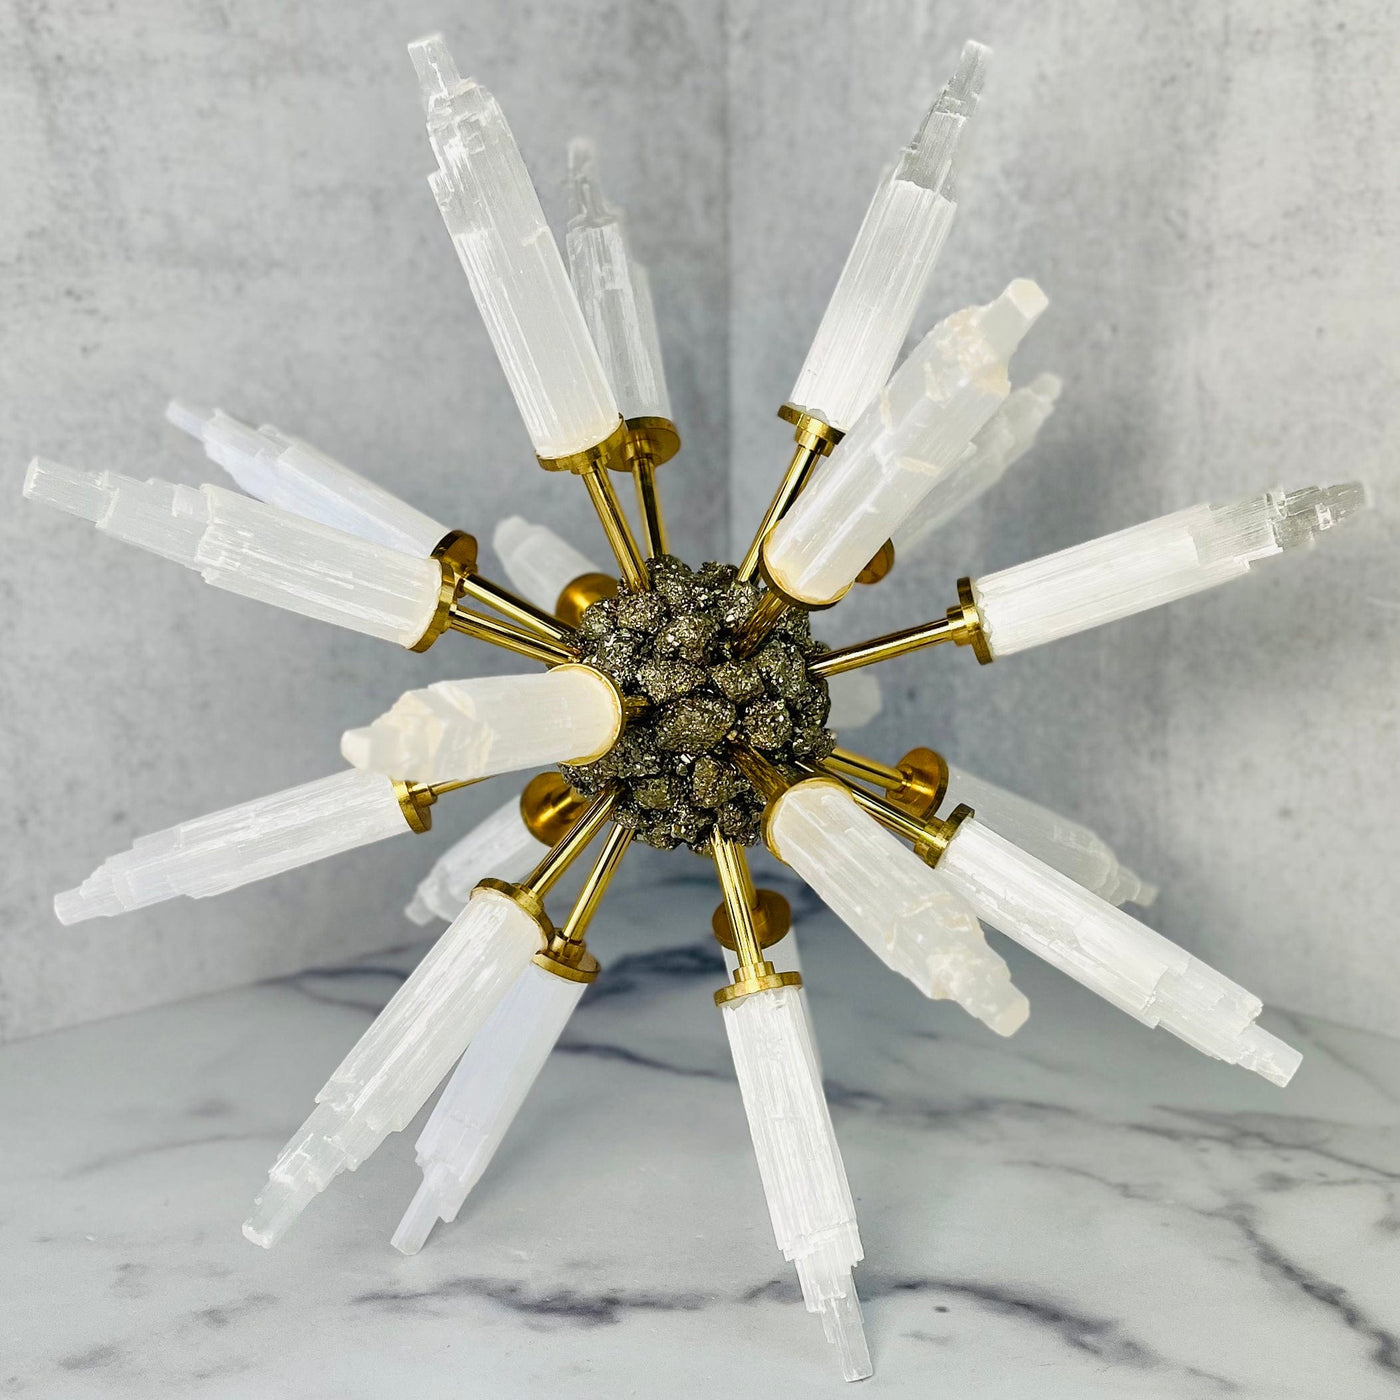 Selenite Point Spike Globe with Pyrite Cluster Center standing on a marble surface.